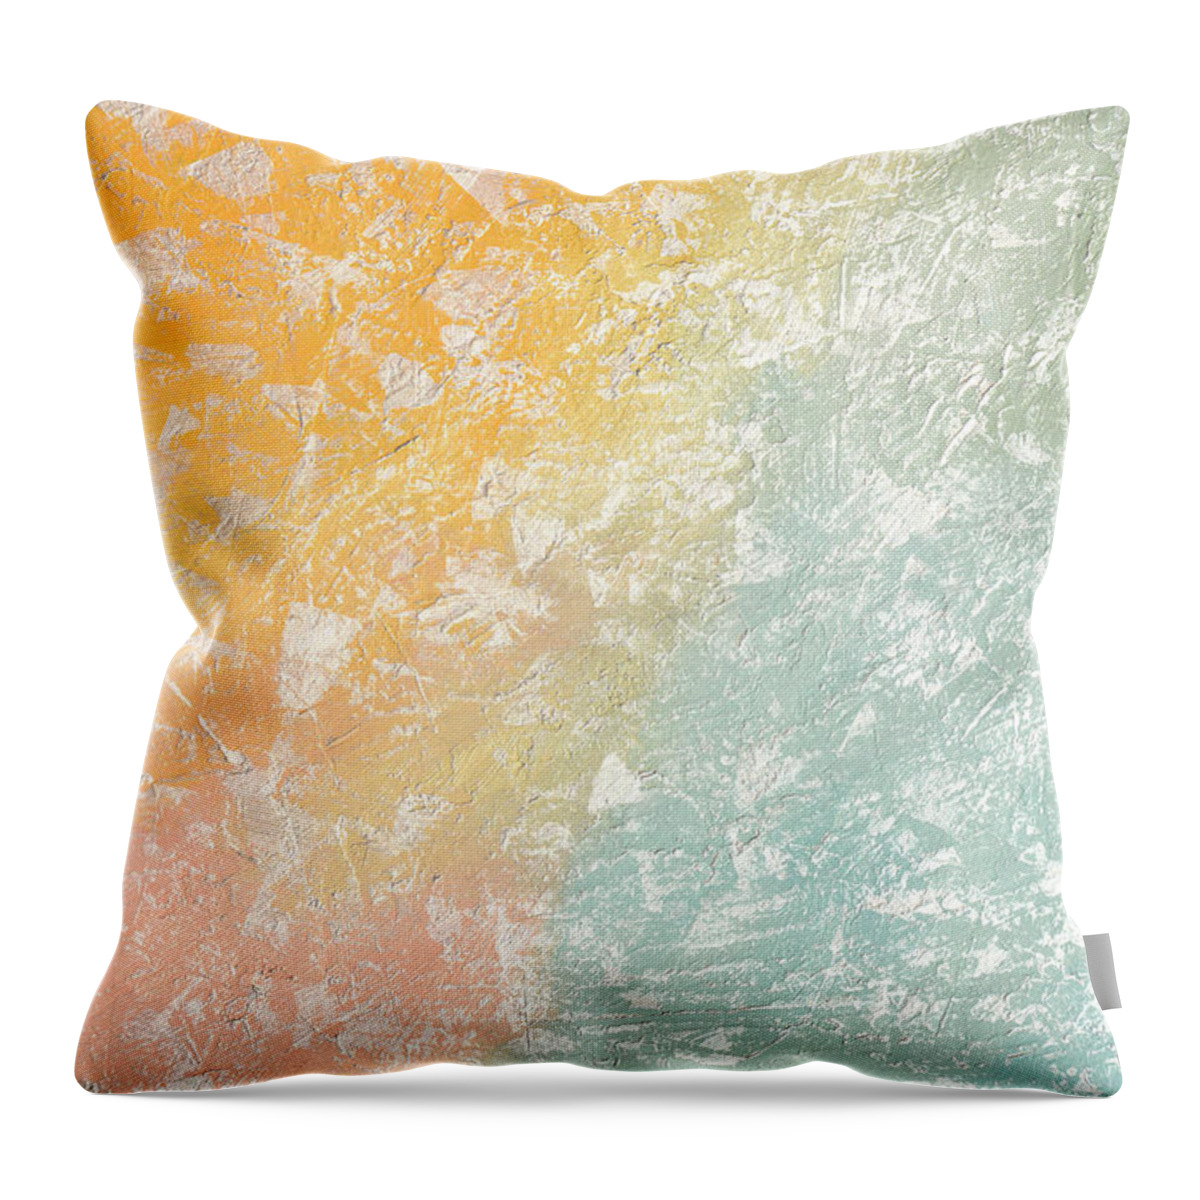 Sky Throw Pillow featuring the painting Shimmering Pastels 2 by Linda Bailey